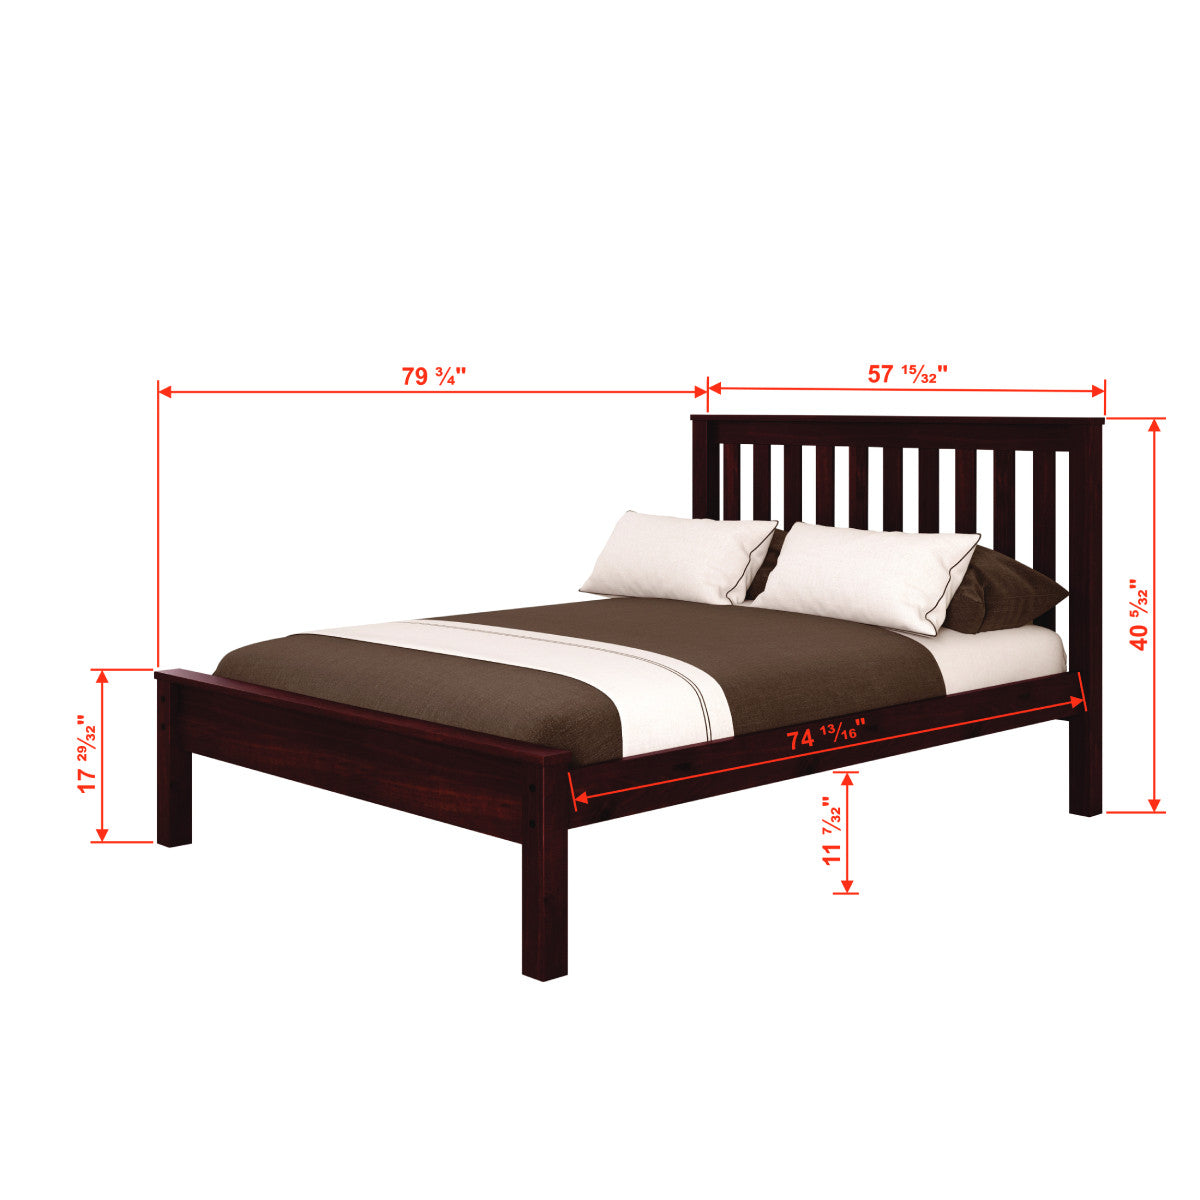 FULL CONTEMPO BED WITH TRUNDLE BED DARK CAPPUCCINO FINISH